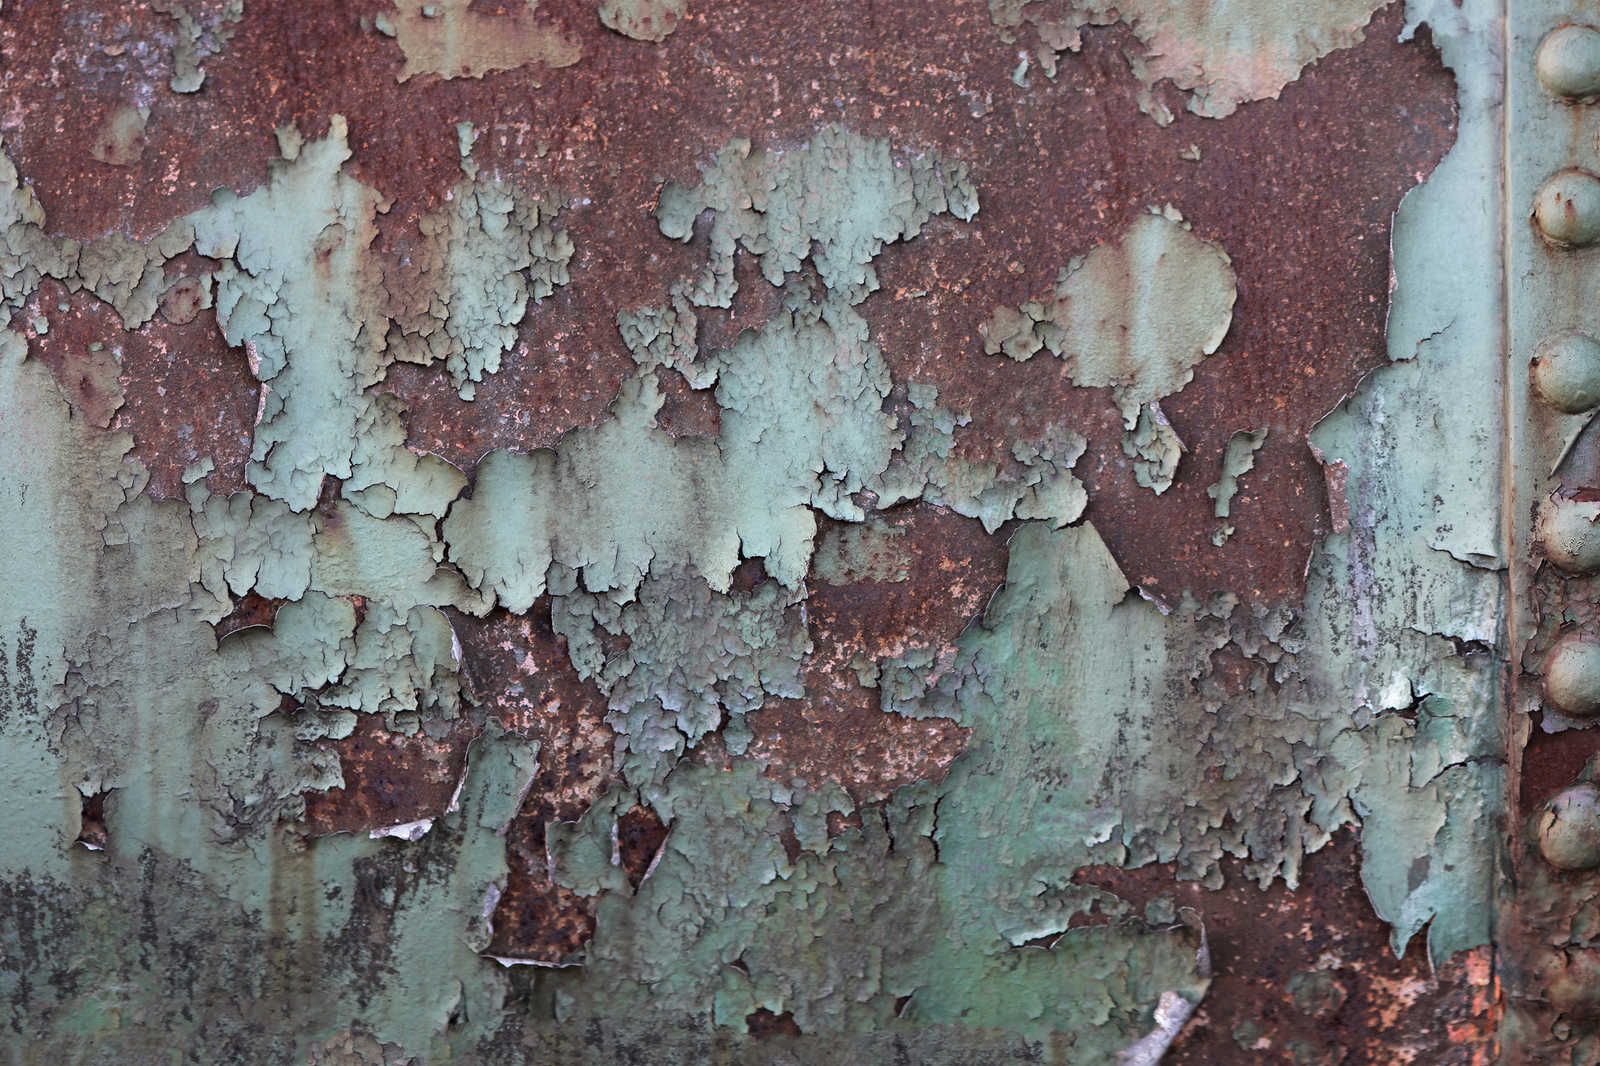             Canvas painting corroding ship's wall - metal plate with rust - 0,90 m x 0,60 m
        